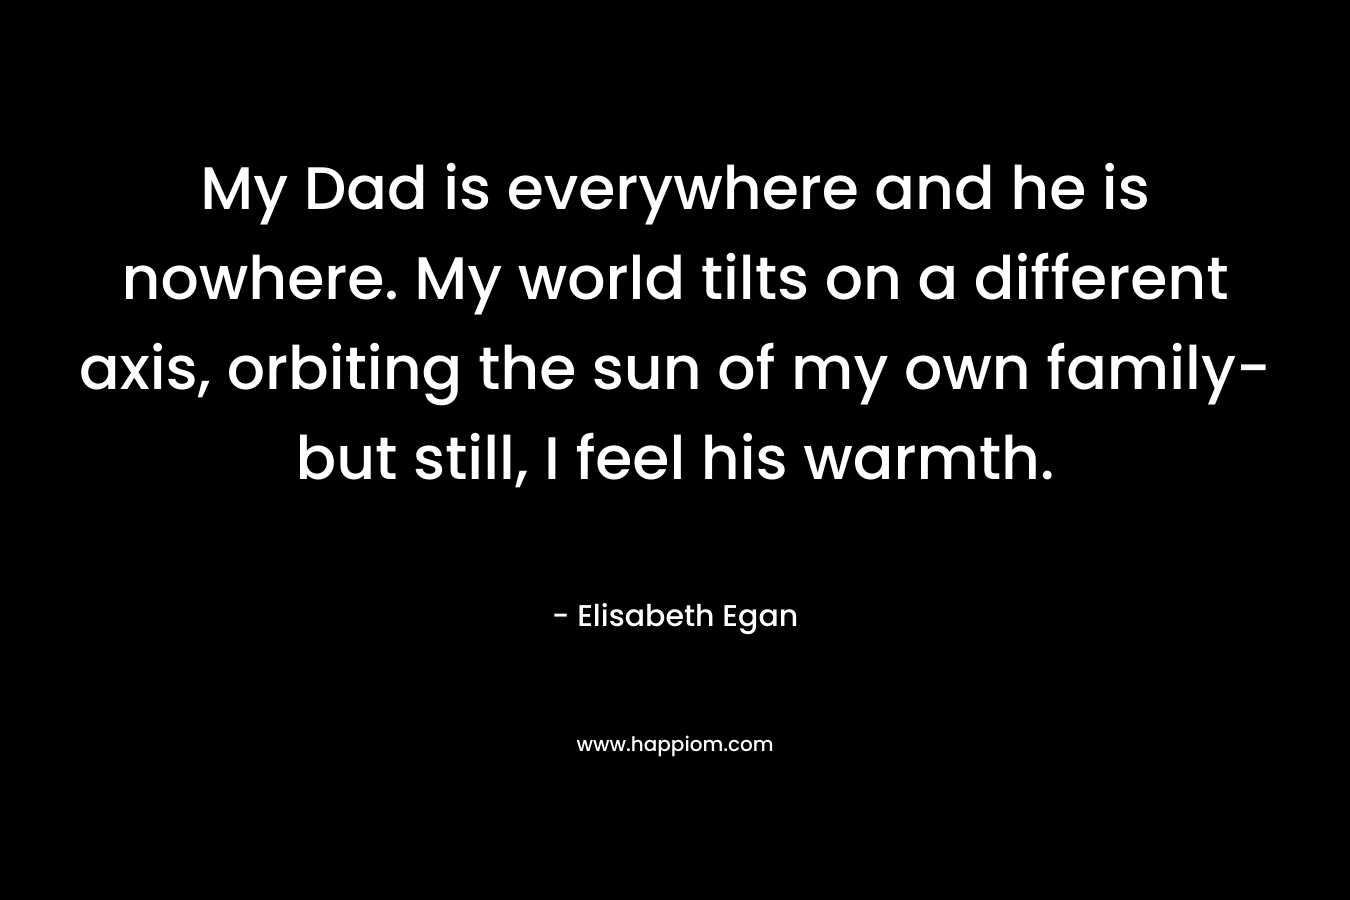 My Dad is everywhere and he is nowhere. My world tilts on a different axis, orbiting the sun of my own family- but still, I feel his warmth. – Elisabeth Egan